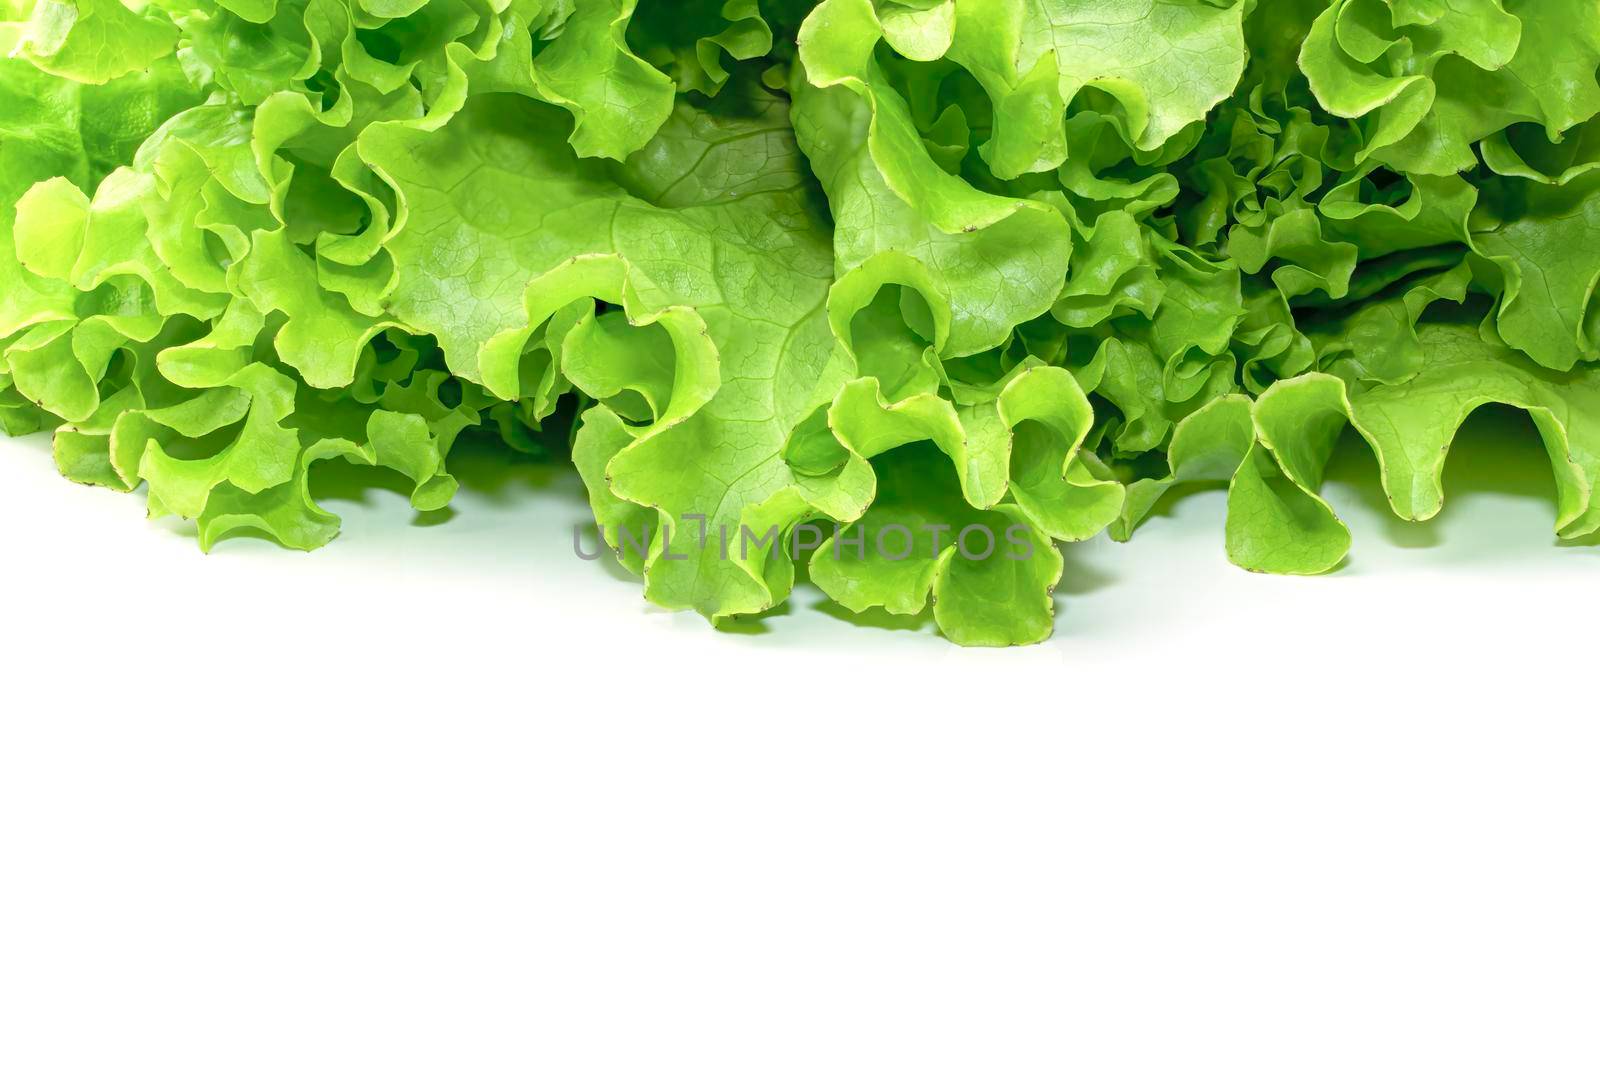 lettuce leaf on a white background close-up. isolate by roman112007